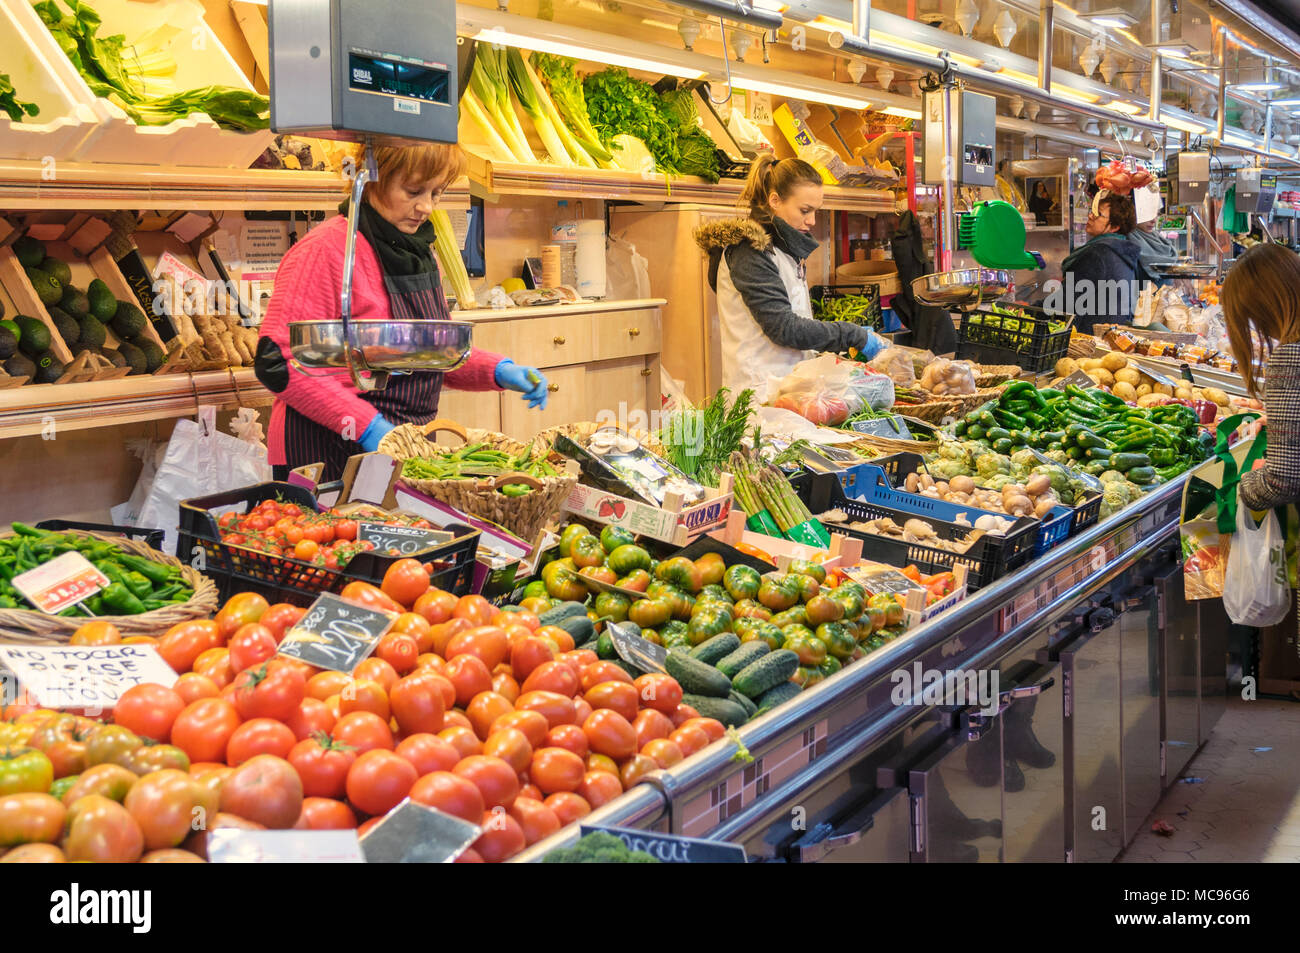 Valencia, Spain - February 24, 2018: Various vegetables in the Central Market of Valencia, Spain Stock Photo